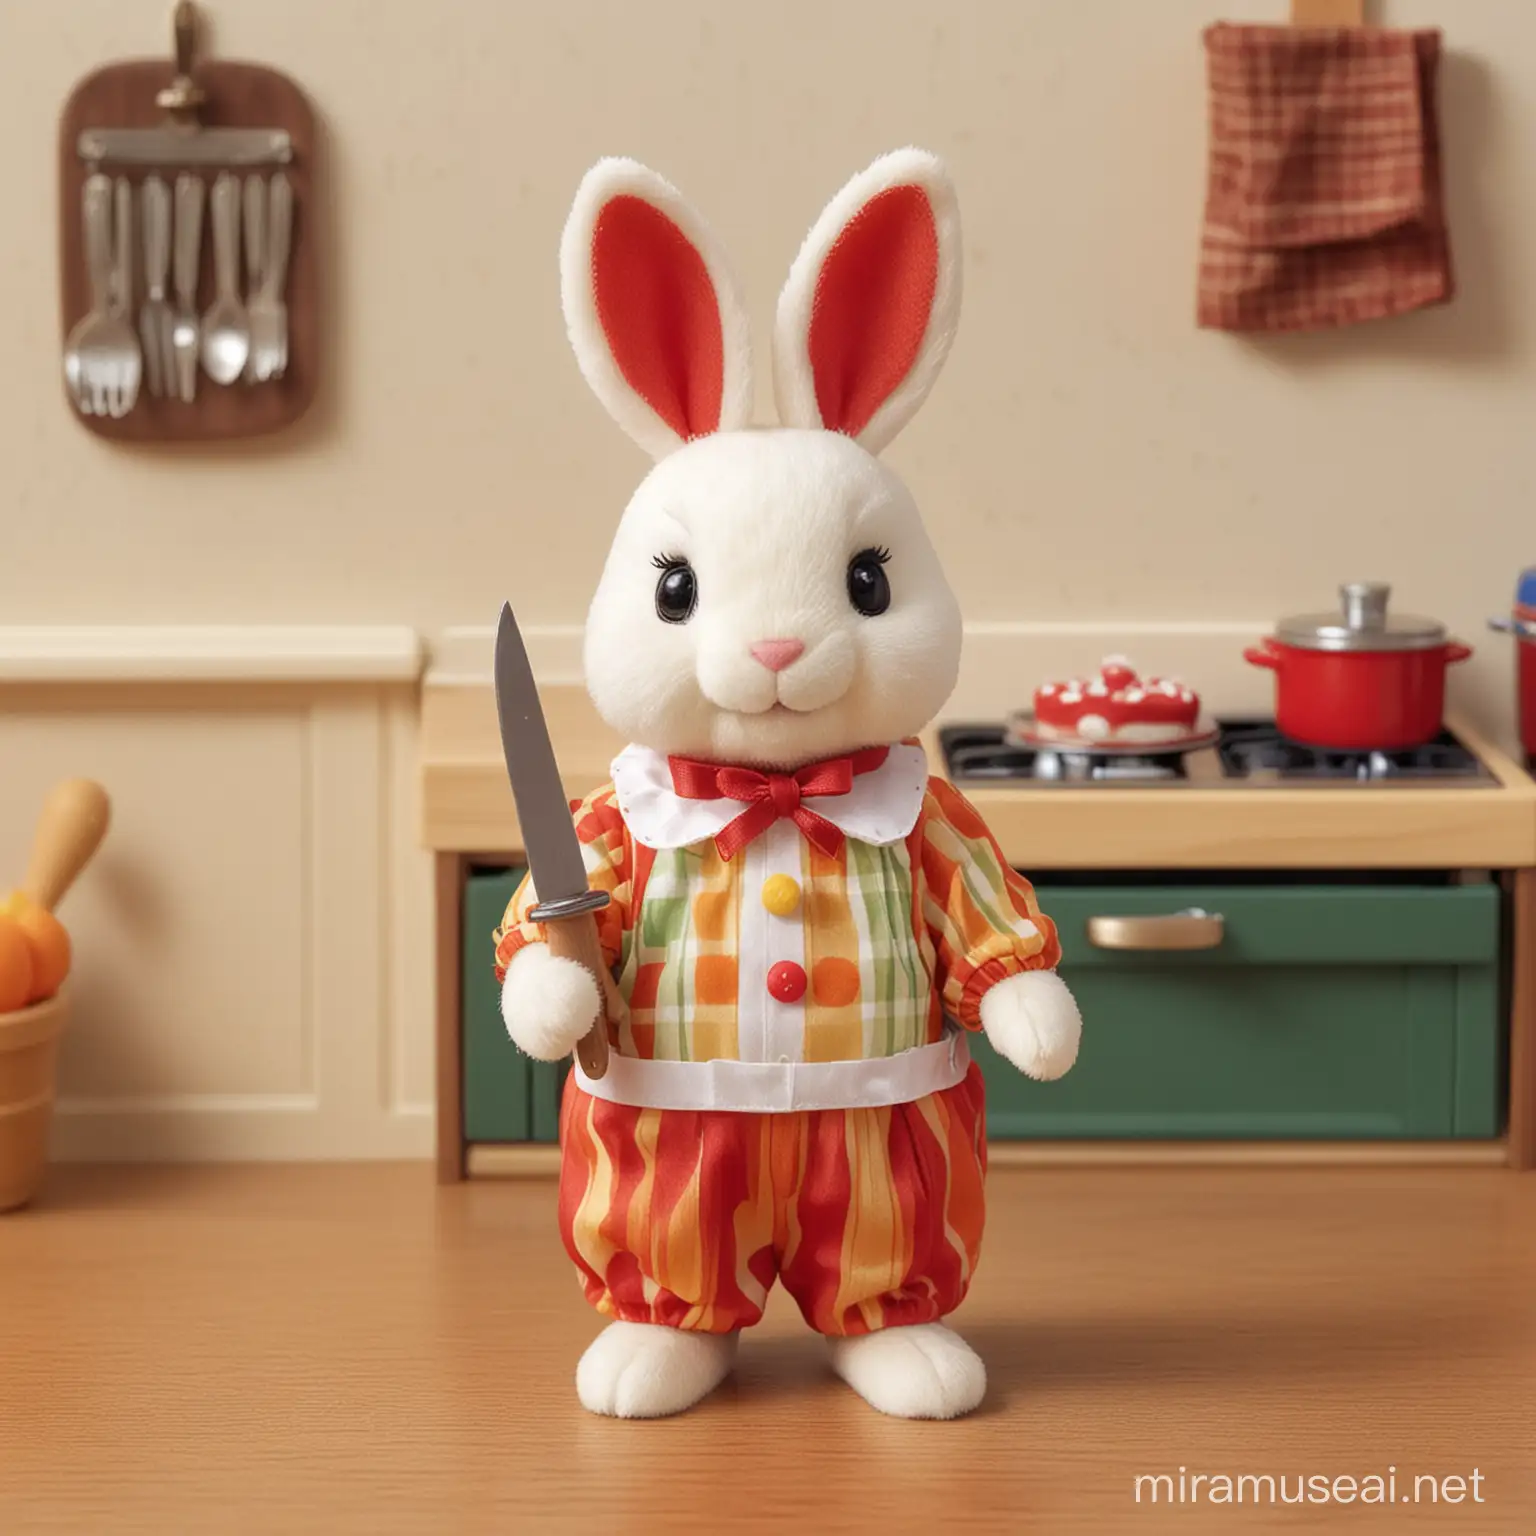 “a toy bunny wearing a clown costume, holding a kitchen knife, in the style of calico critters”